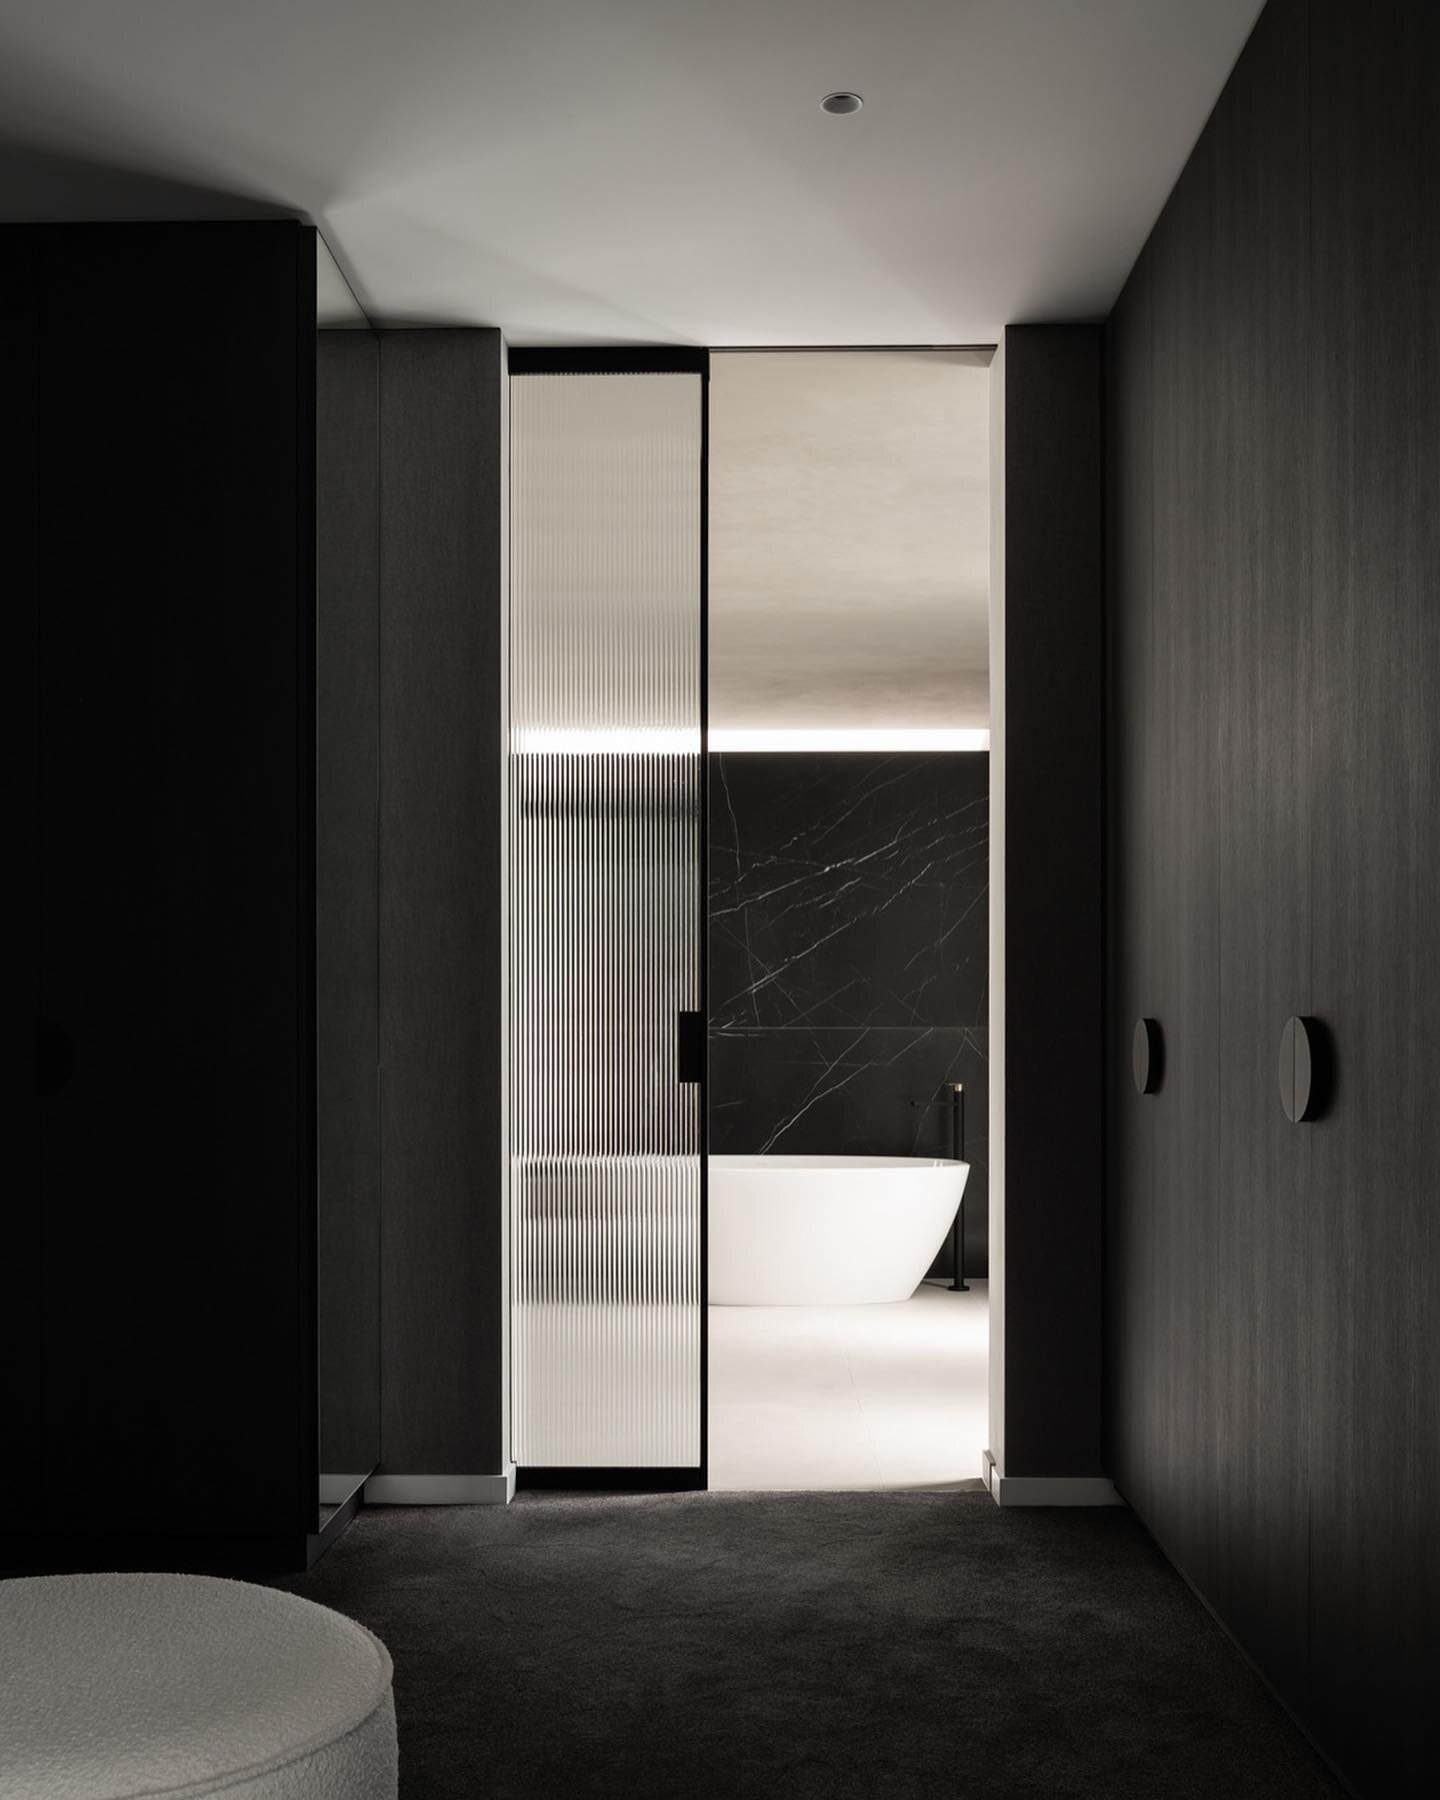 Contrasting elements overlay a boldness between spaces and draw focus to framed views within the home. The monochromatic palette is reinforced by the use of limited yet intentional materiality, allowing the light filled ensuite to stand proud, emergi